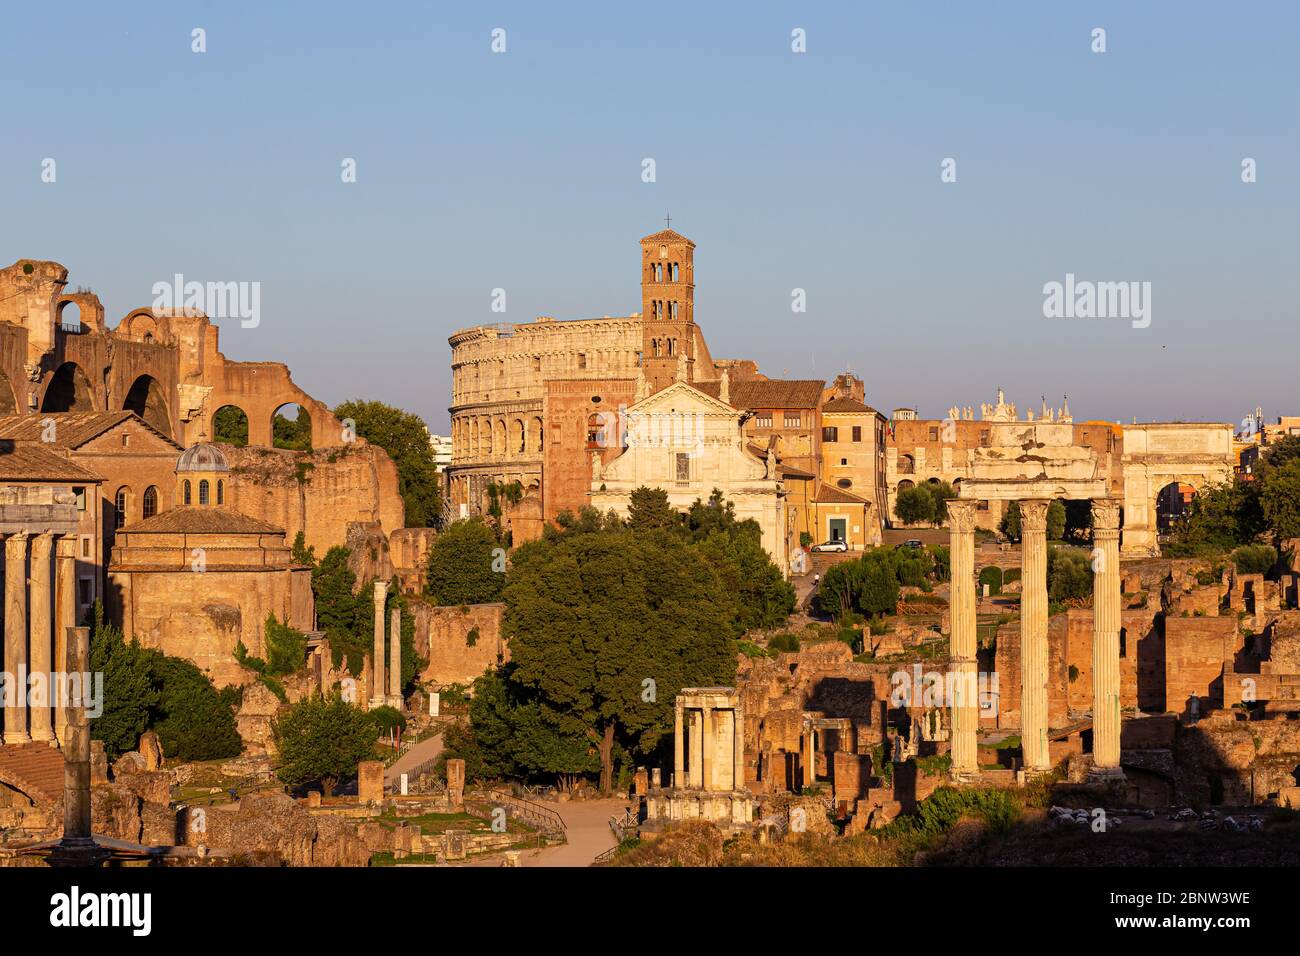 ROME, ITALY - AUGUST 10, 2019: view of ancient Rome, Imperial Fora and Colosseum Stock Photo